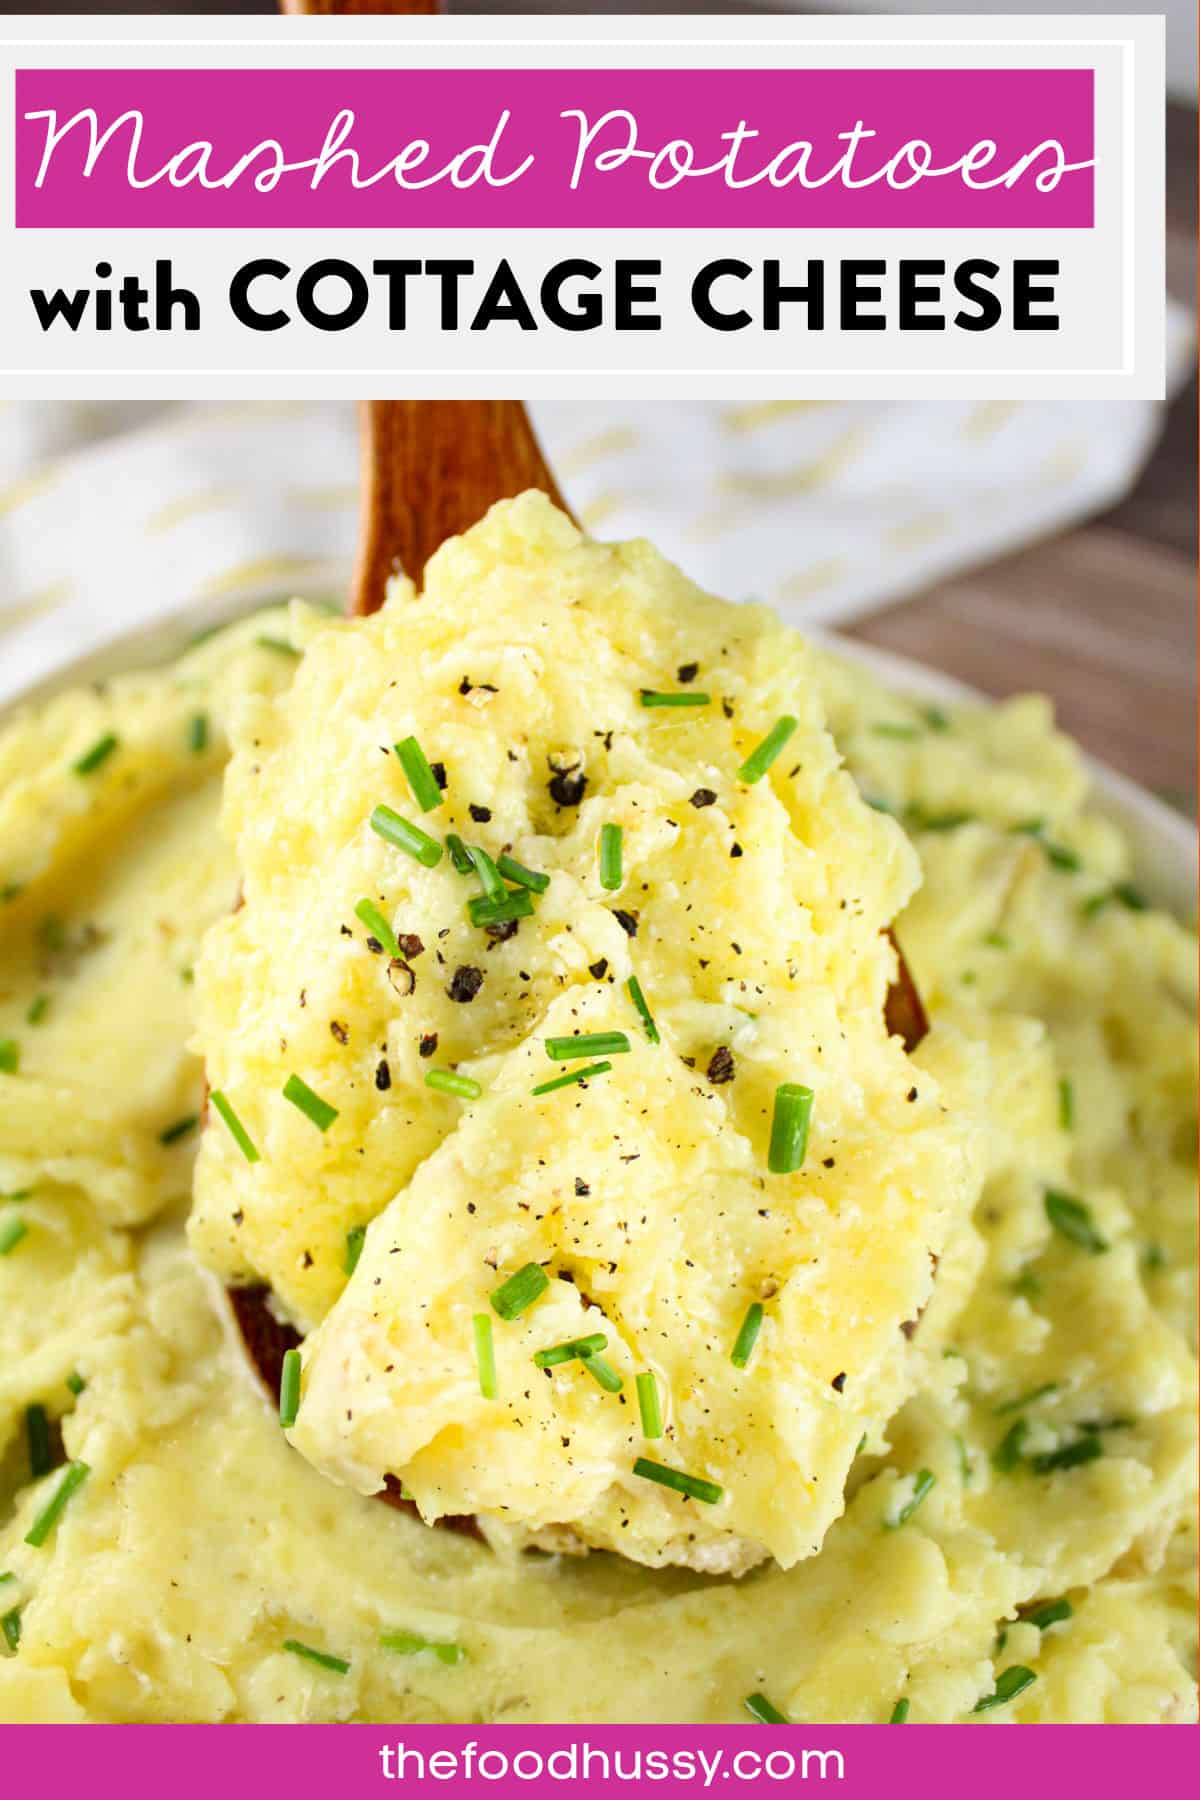 Roasted Garlic Mashed Potatoes with Cottage Cheese are my new favorite way to make mashed taters! They've got that creamy texture and are so full of rich flavor from the roasted garlic! Cottage cheese might seem odd - but trust me - this secret ingredient works! via @foodhussy